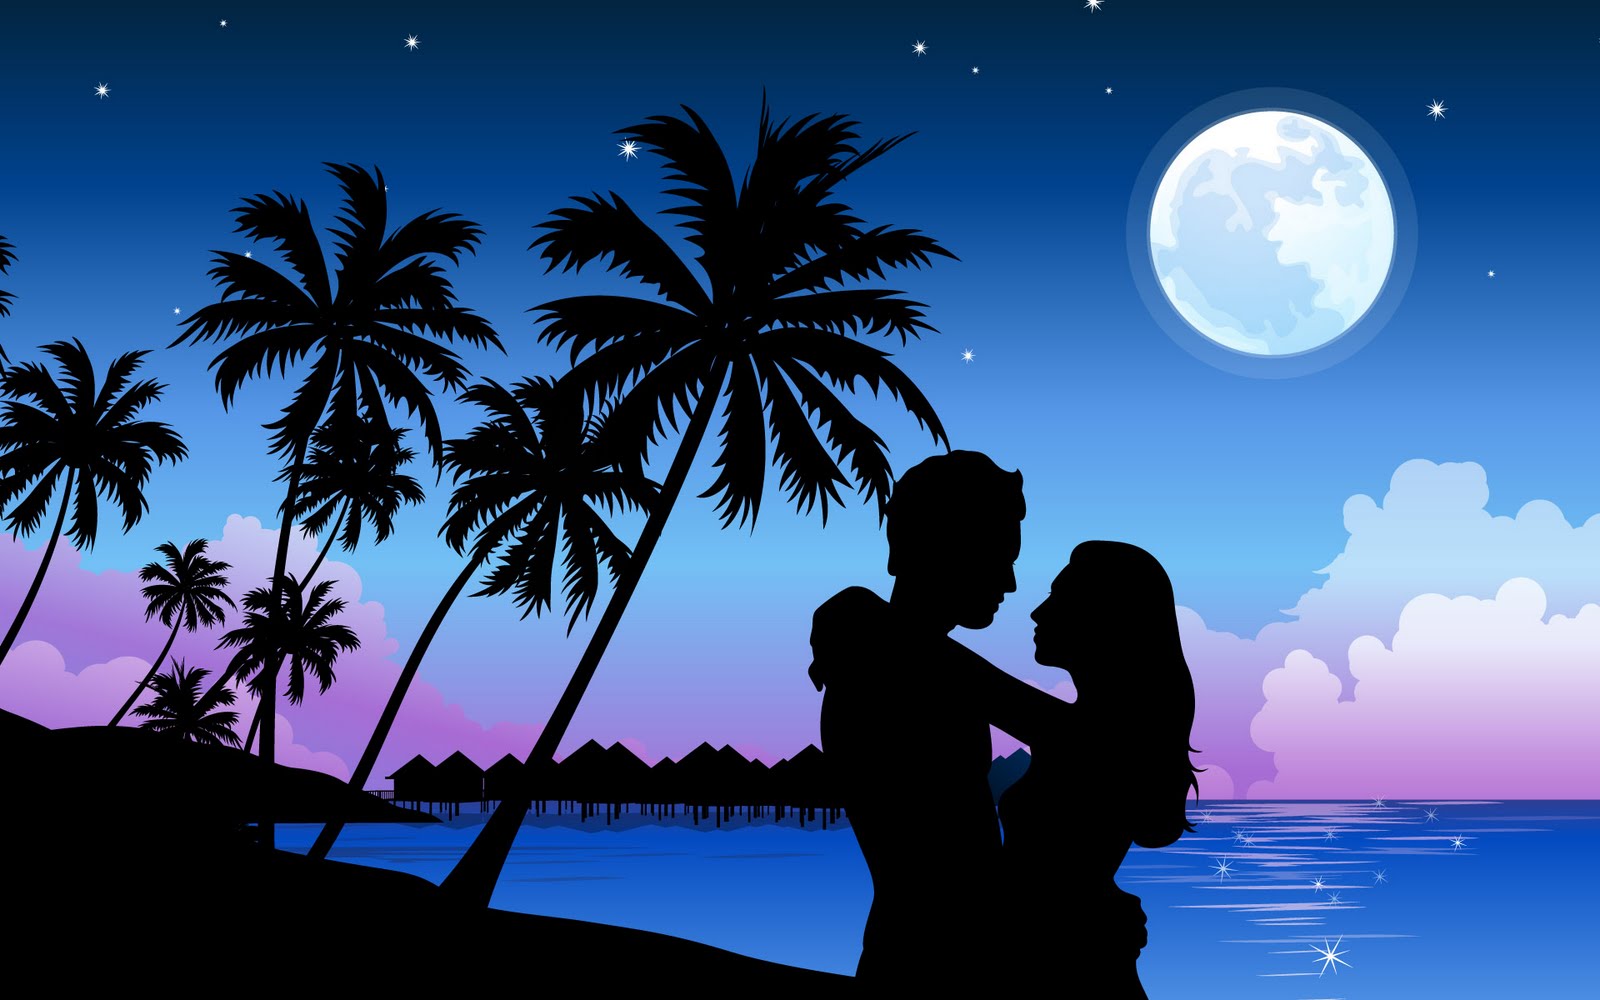 A Wallpapers Home Romantic Paradise Digital Art Beautiful Love Wallpapers Nature Background Wallpapers